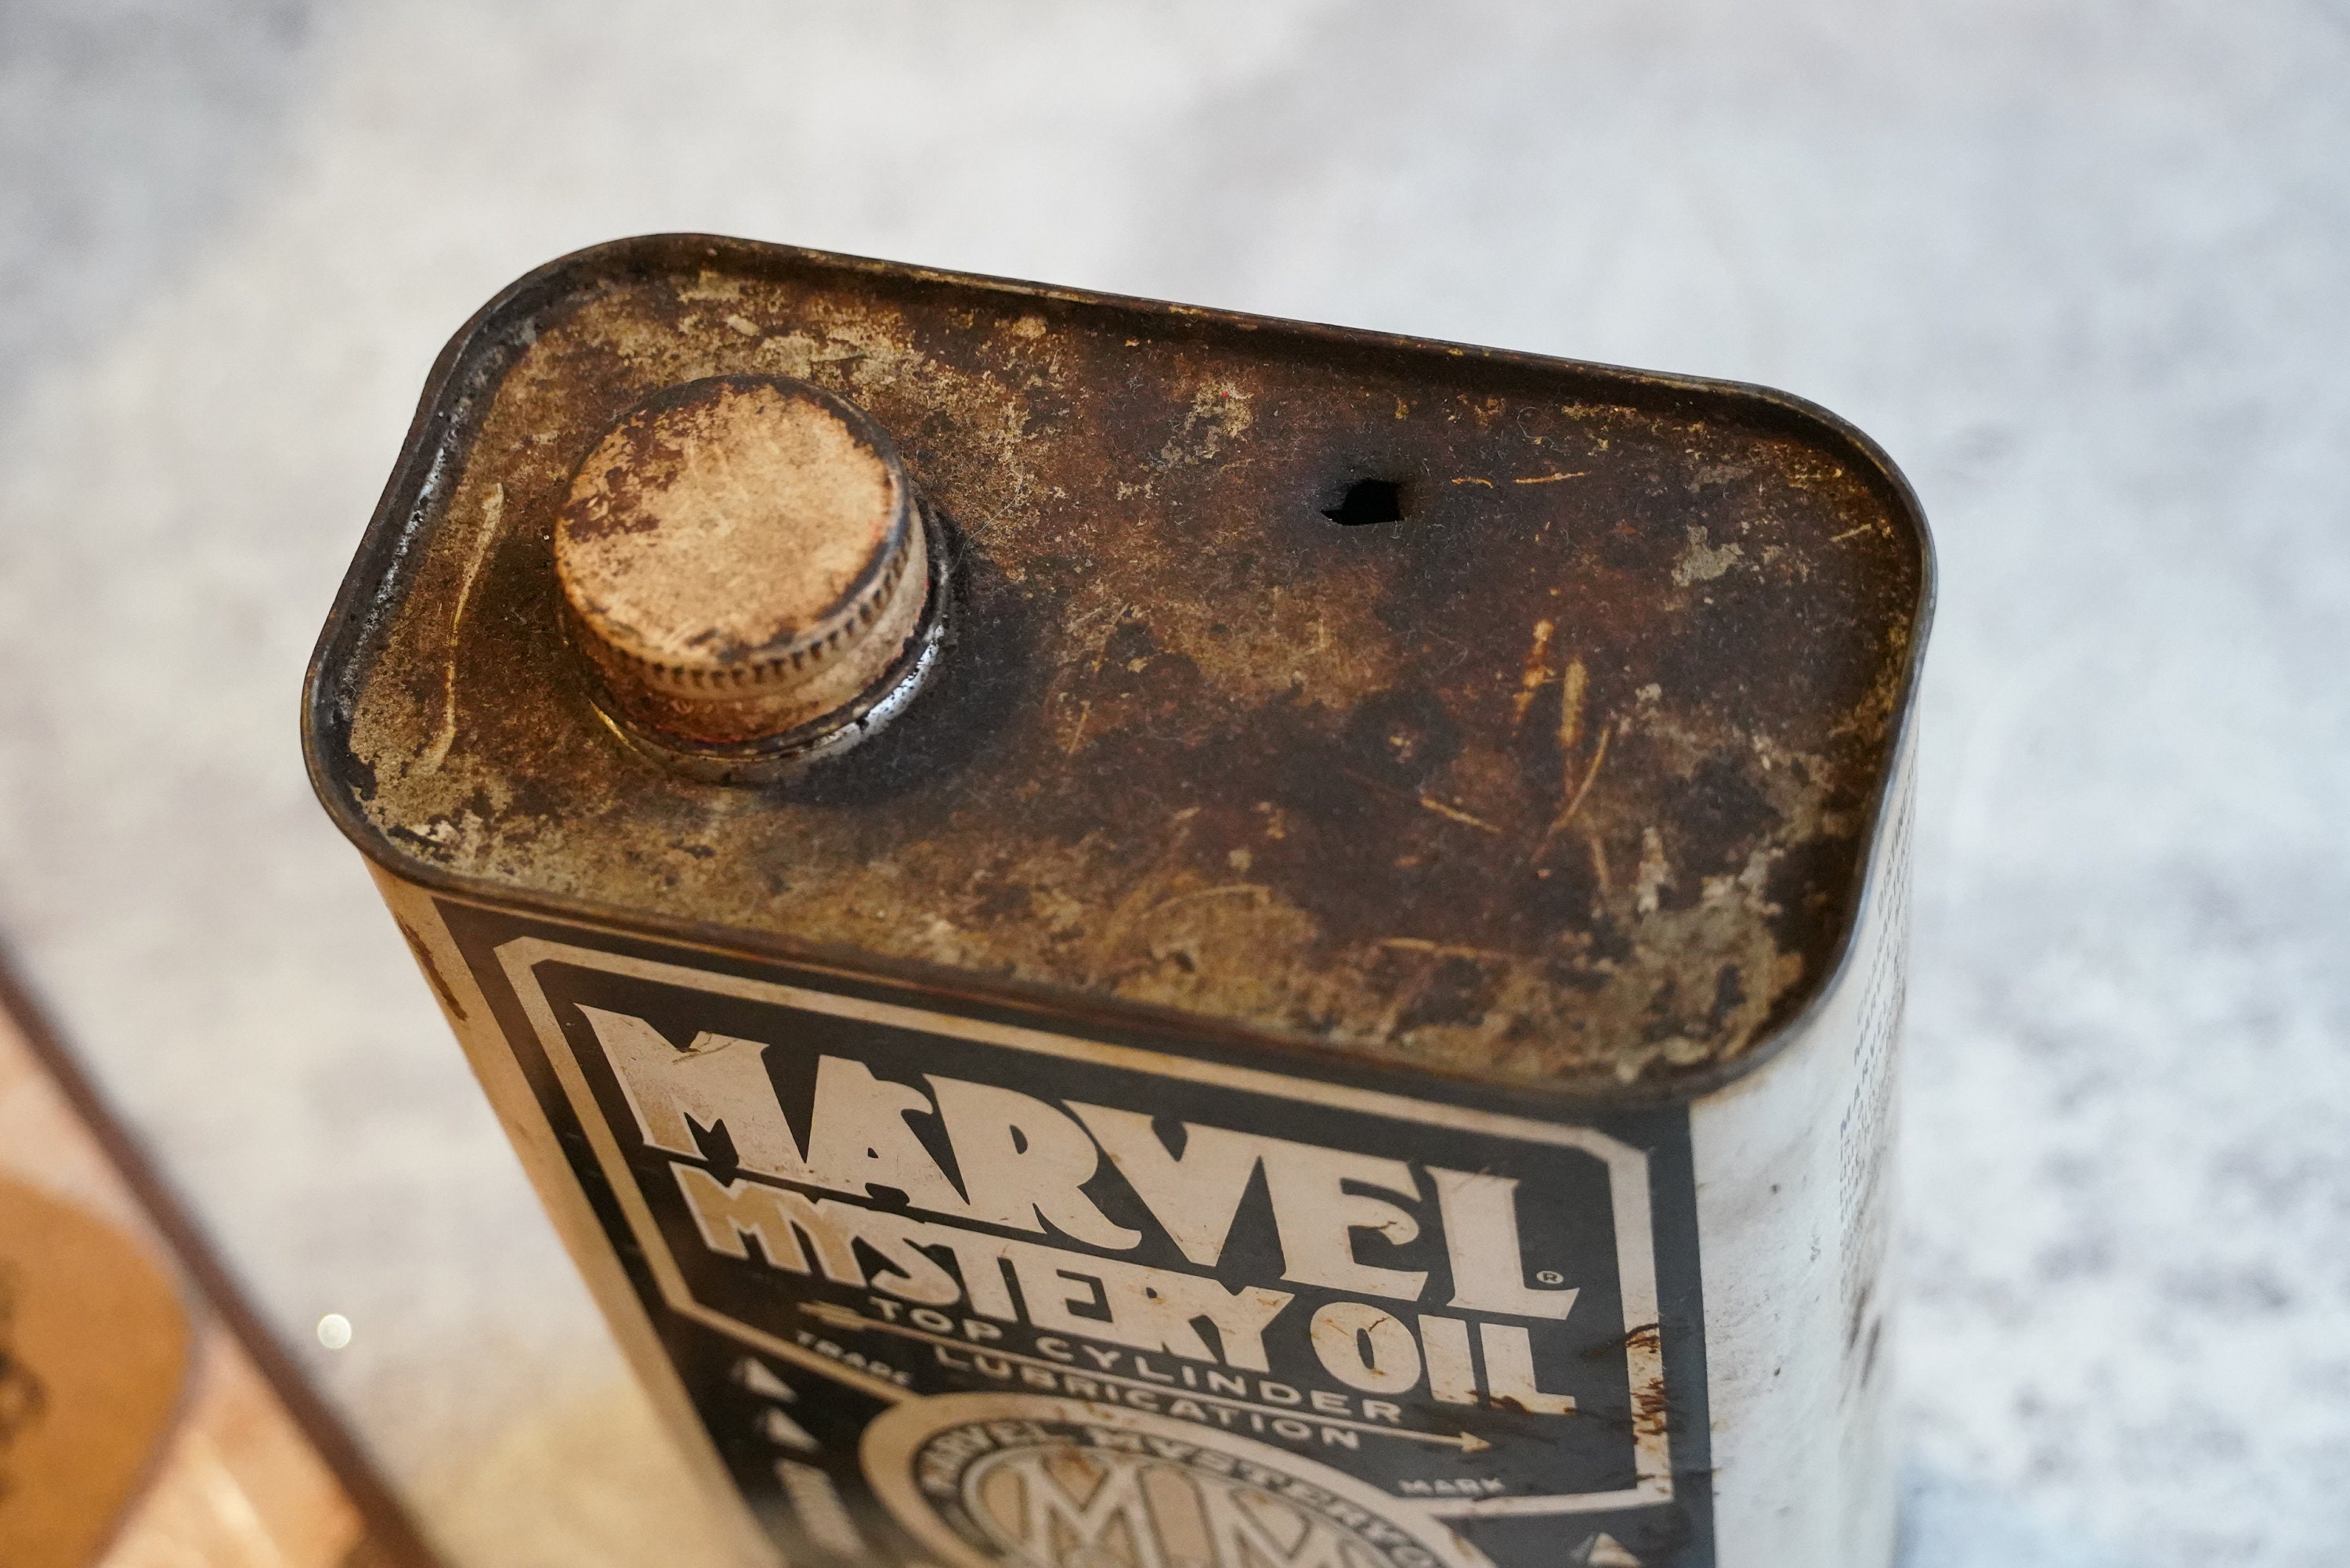 Marvel Mystery Oil Top Cylinder Lubrication, Quart - Vintage Ford Parts,  Music & Collectibles